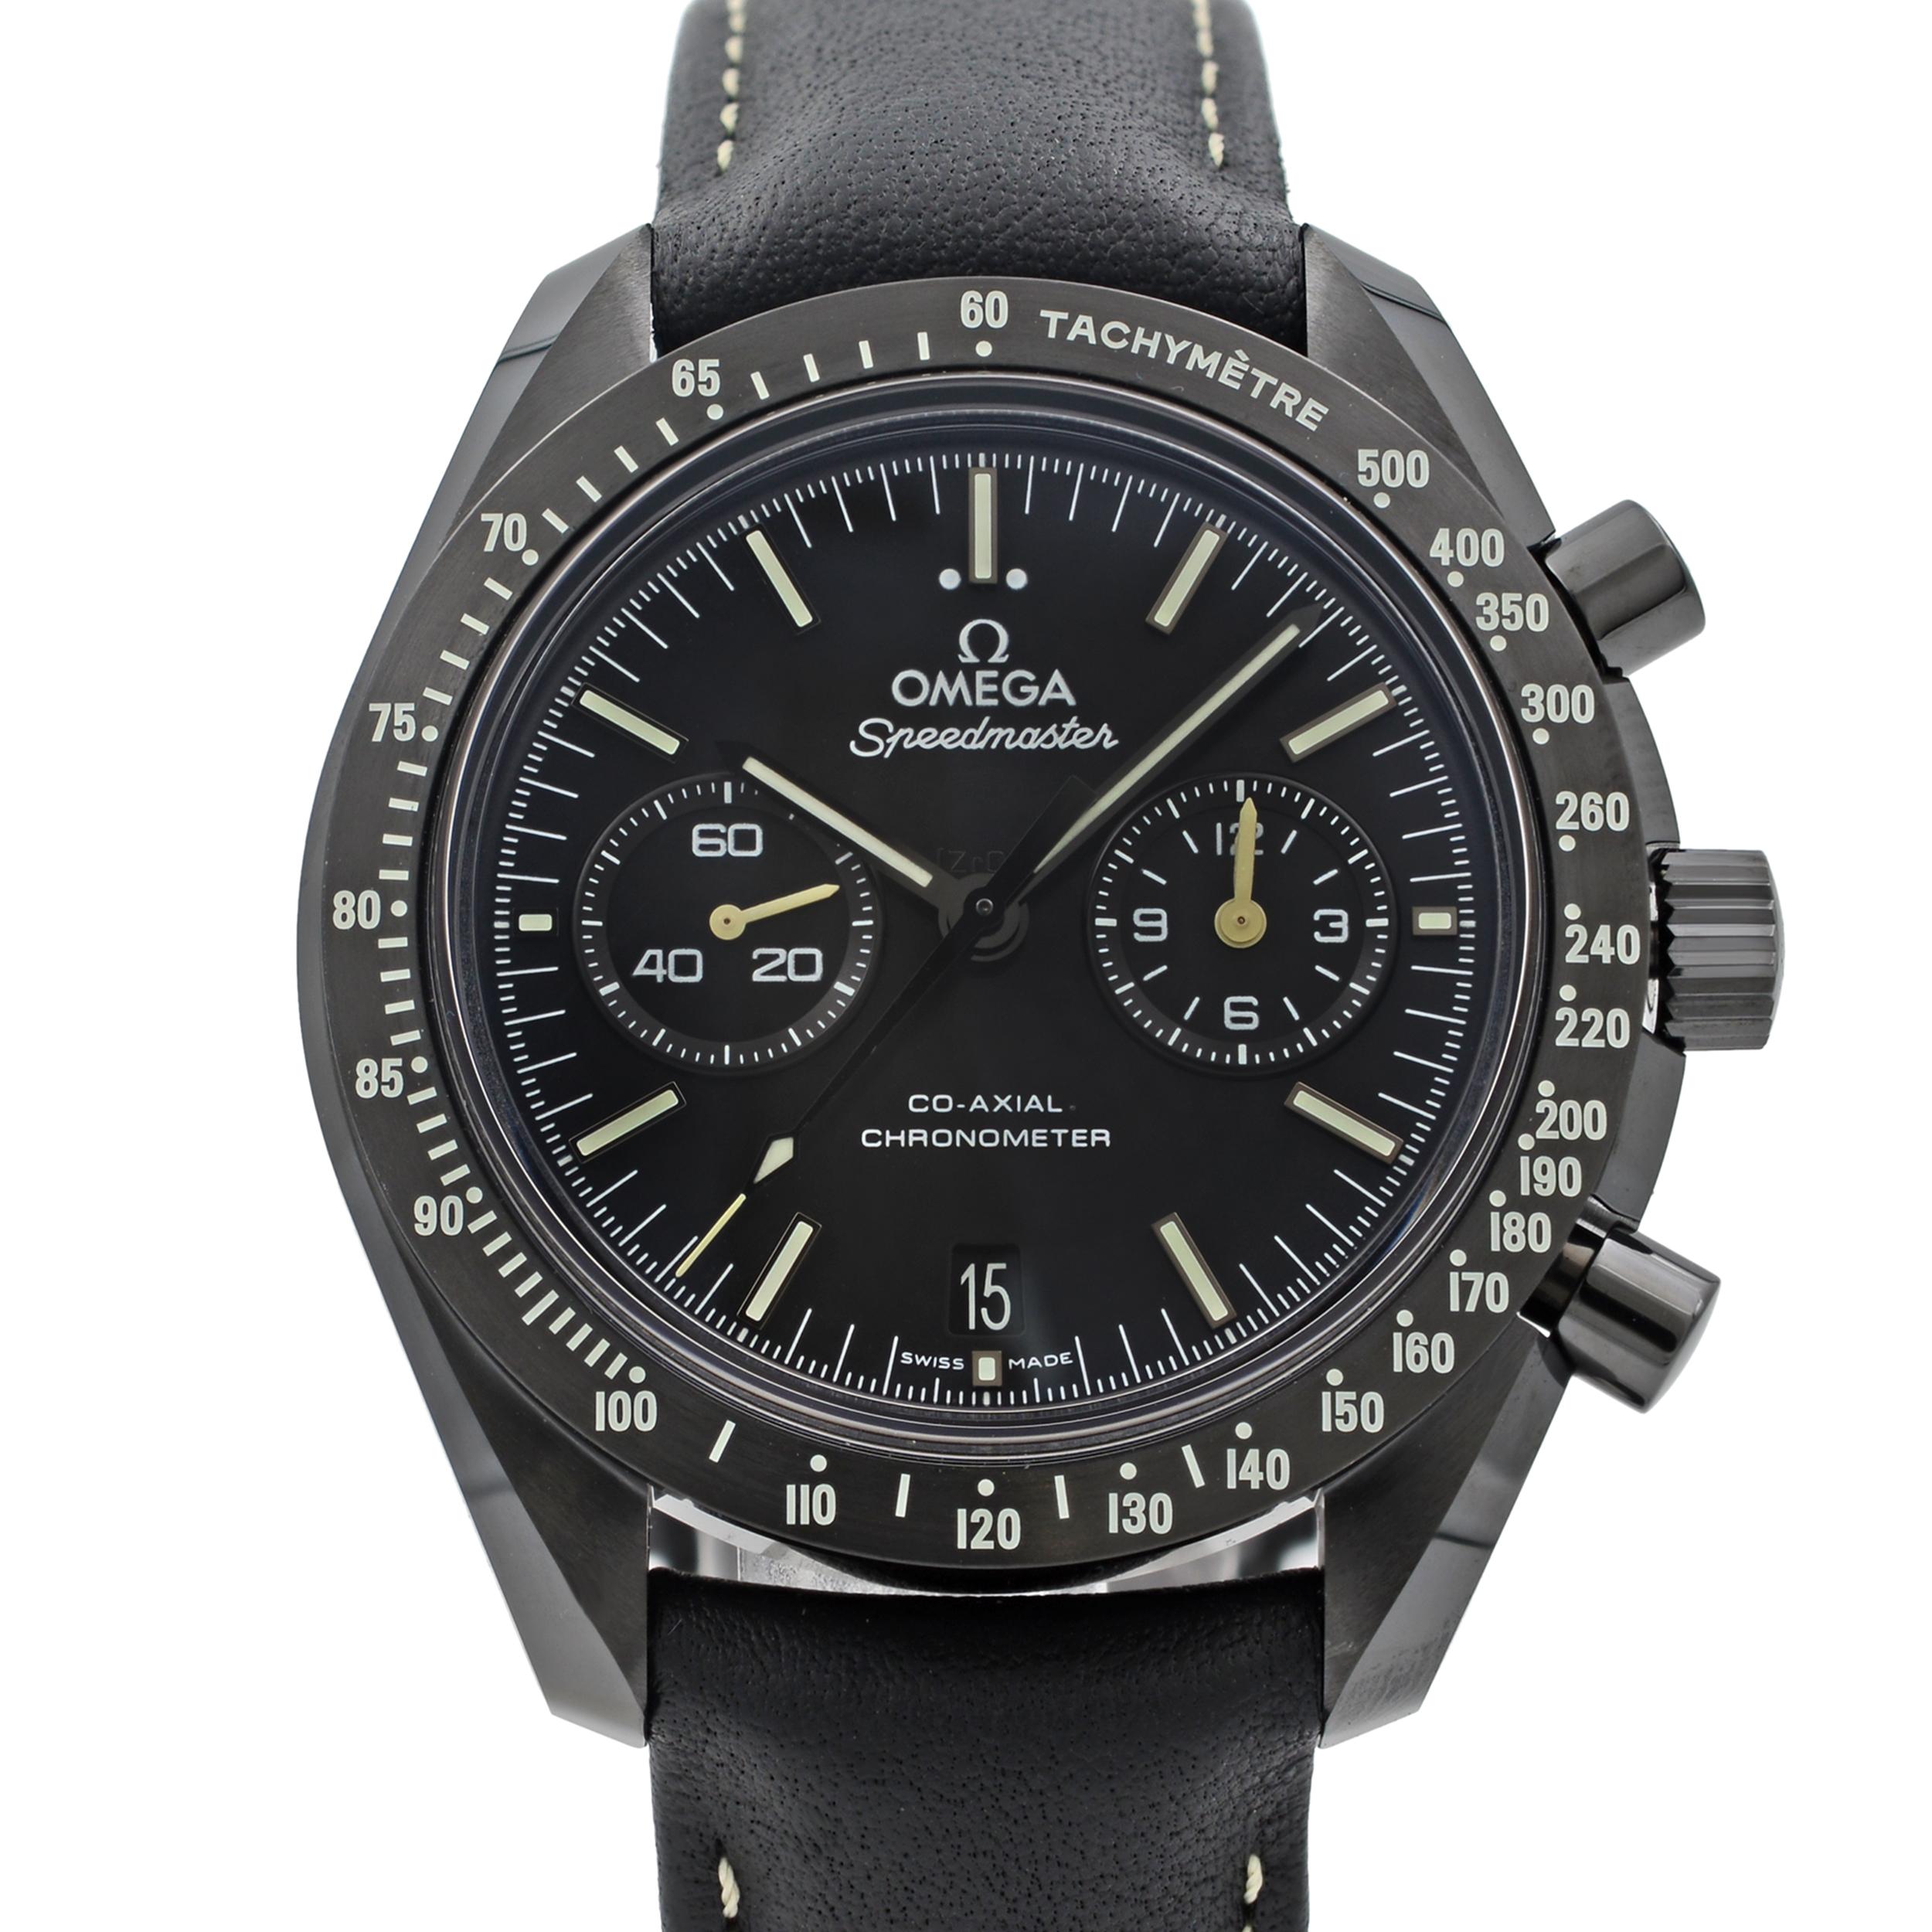 This New With Defects Omega Speedmaster 311.92.44.51.01.004 is a beautiful men's timepiece that is powered by mechanical (automatic) movement which is cased in a ceramic case. It has a round shape face, chronograph, date indicator, small seconds